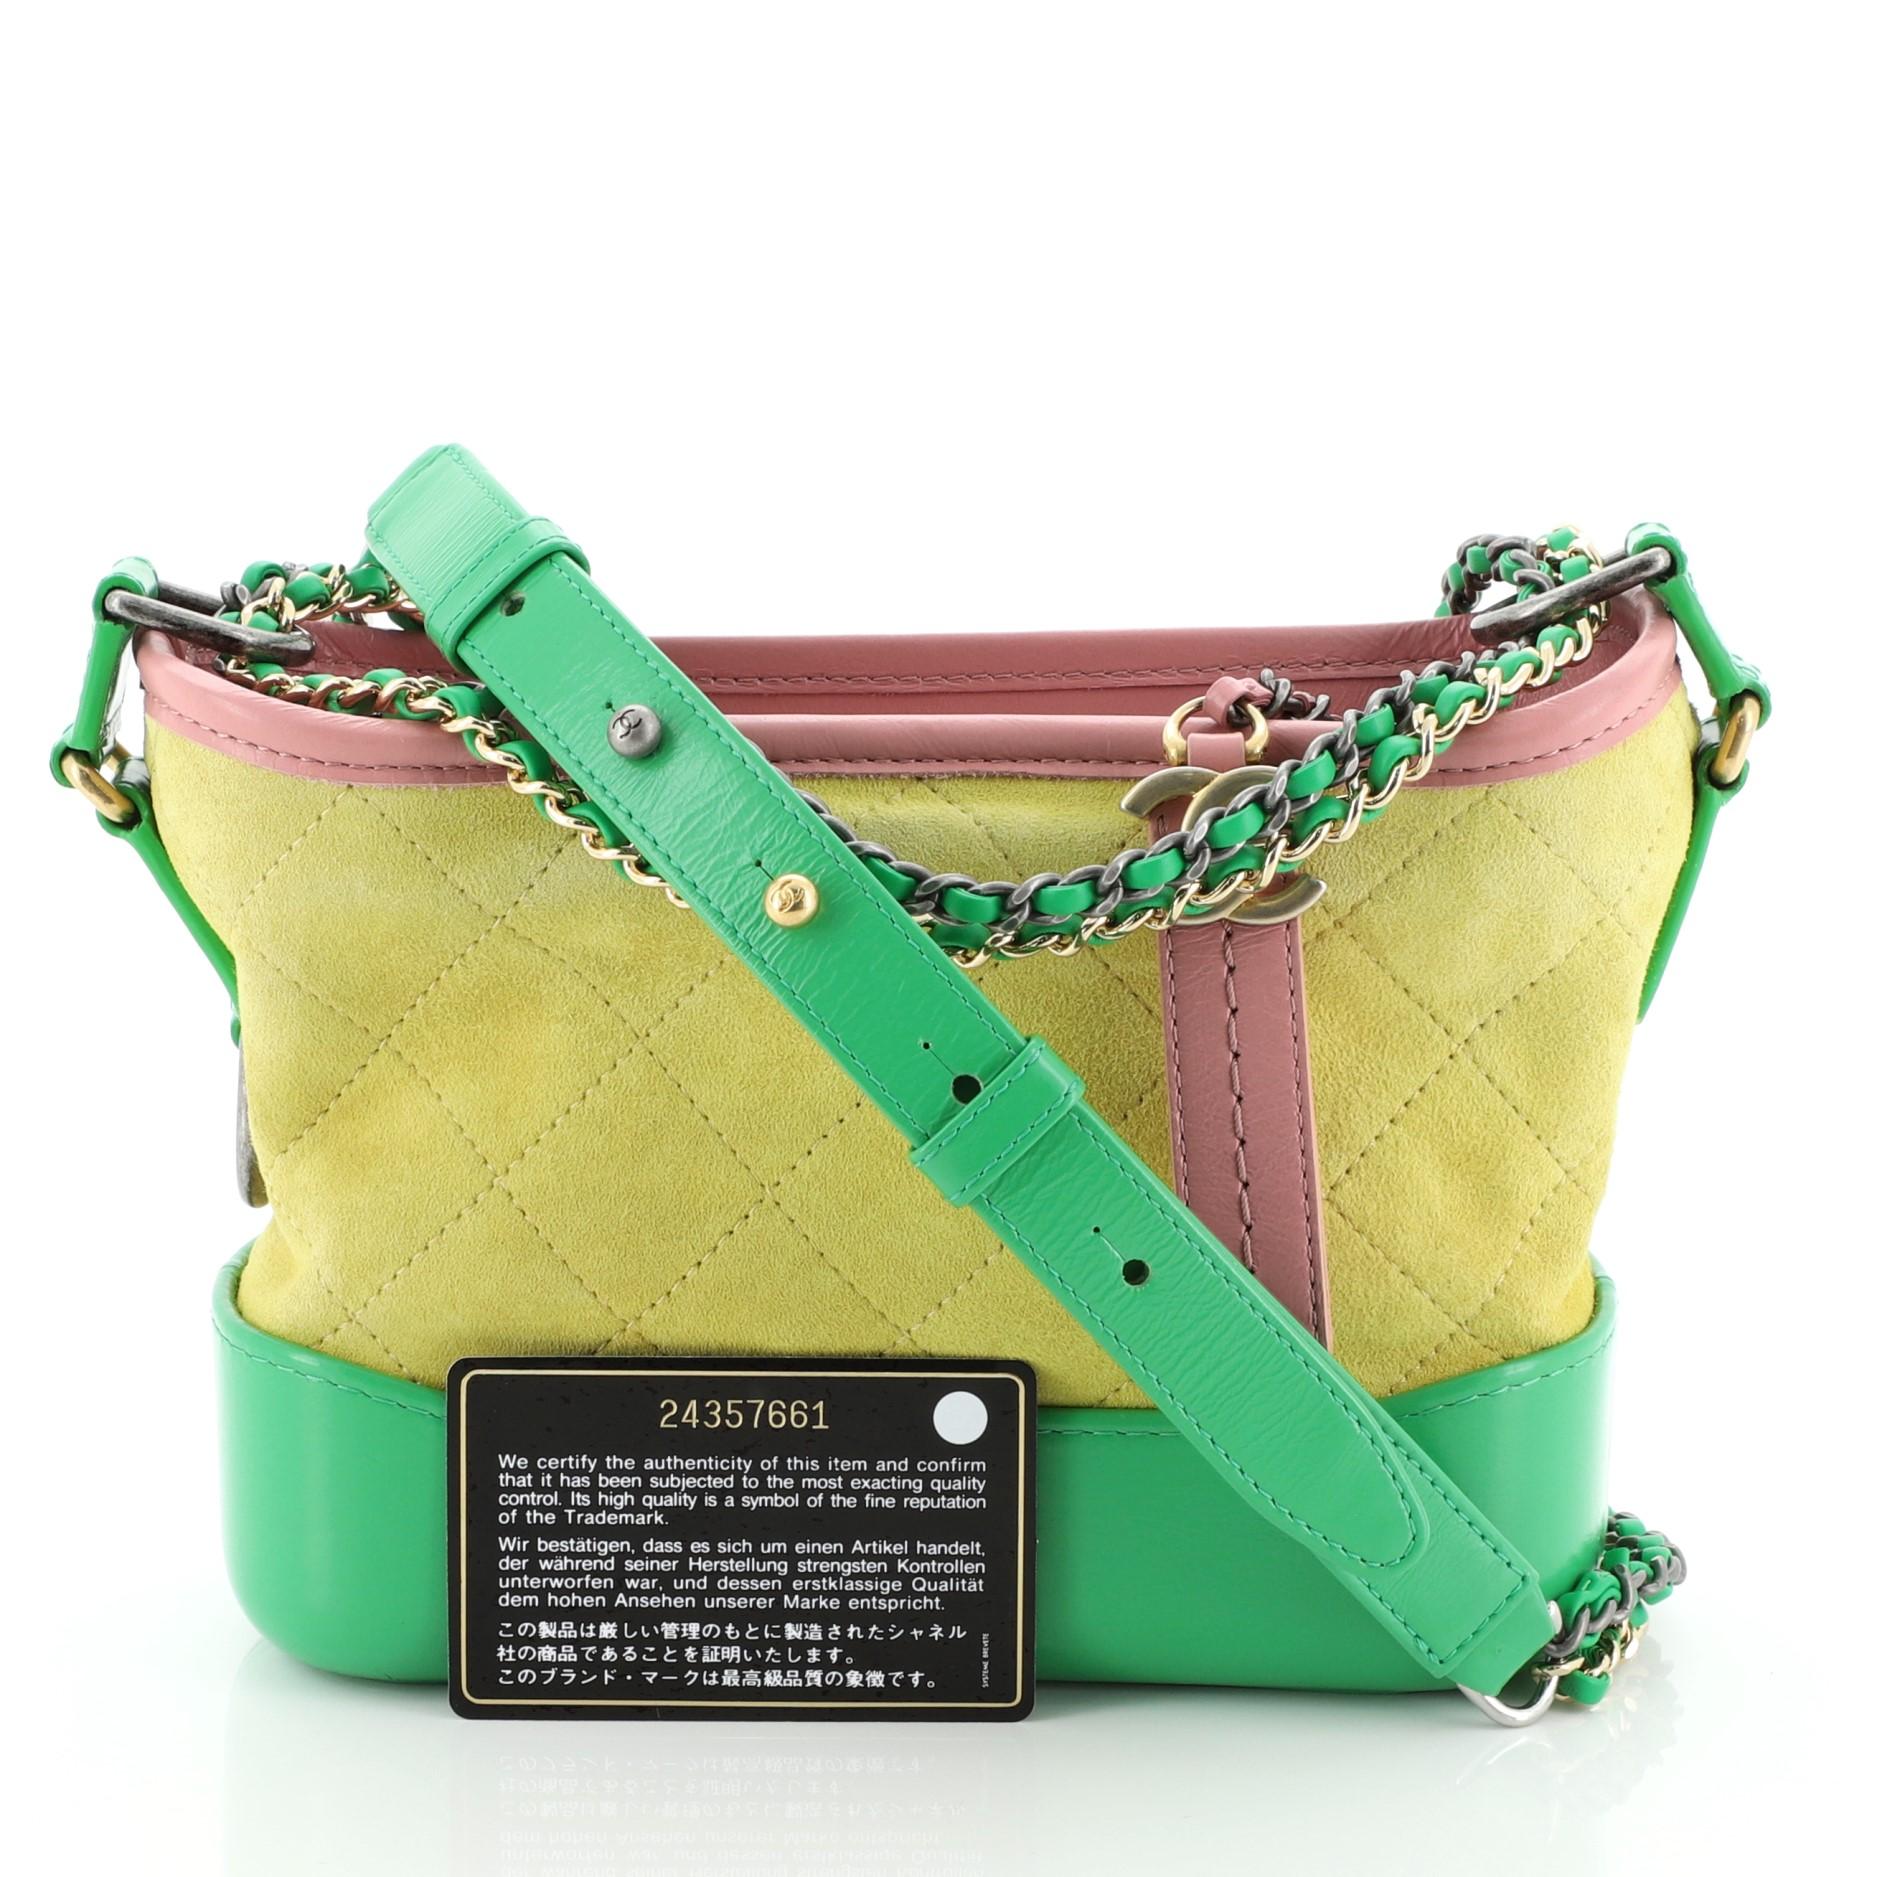 This Chanel Gabrielle Hobo Quilted Suede Small is classic piece with a distinctive shape that was inspired by the structured silhouette of a binocular case. Crafted from yellow quilted suede and green and pink leather, it features woven-in leather